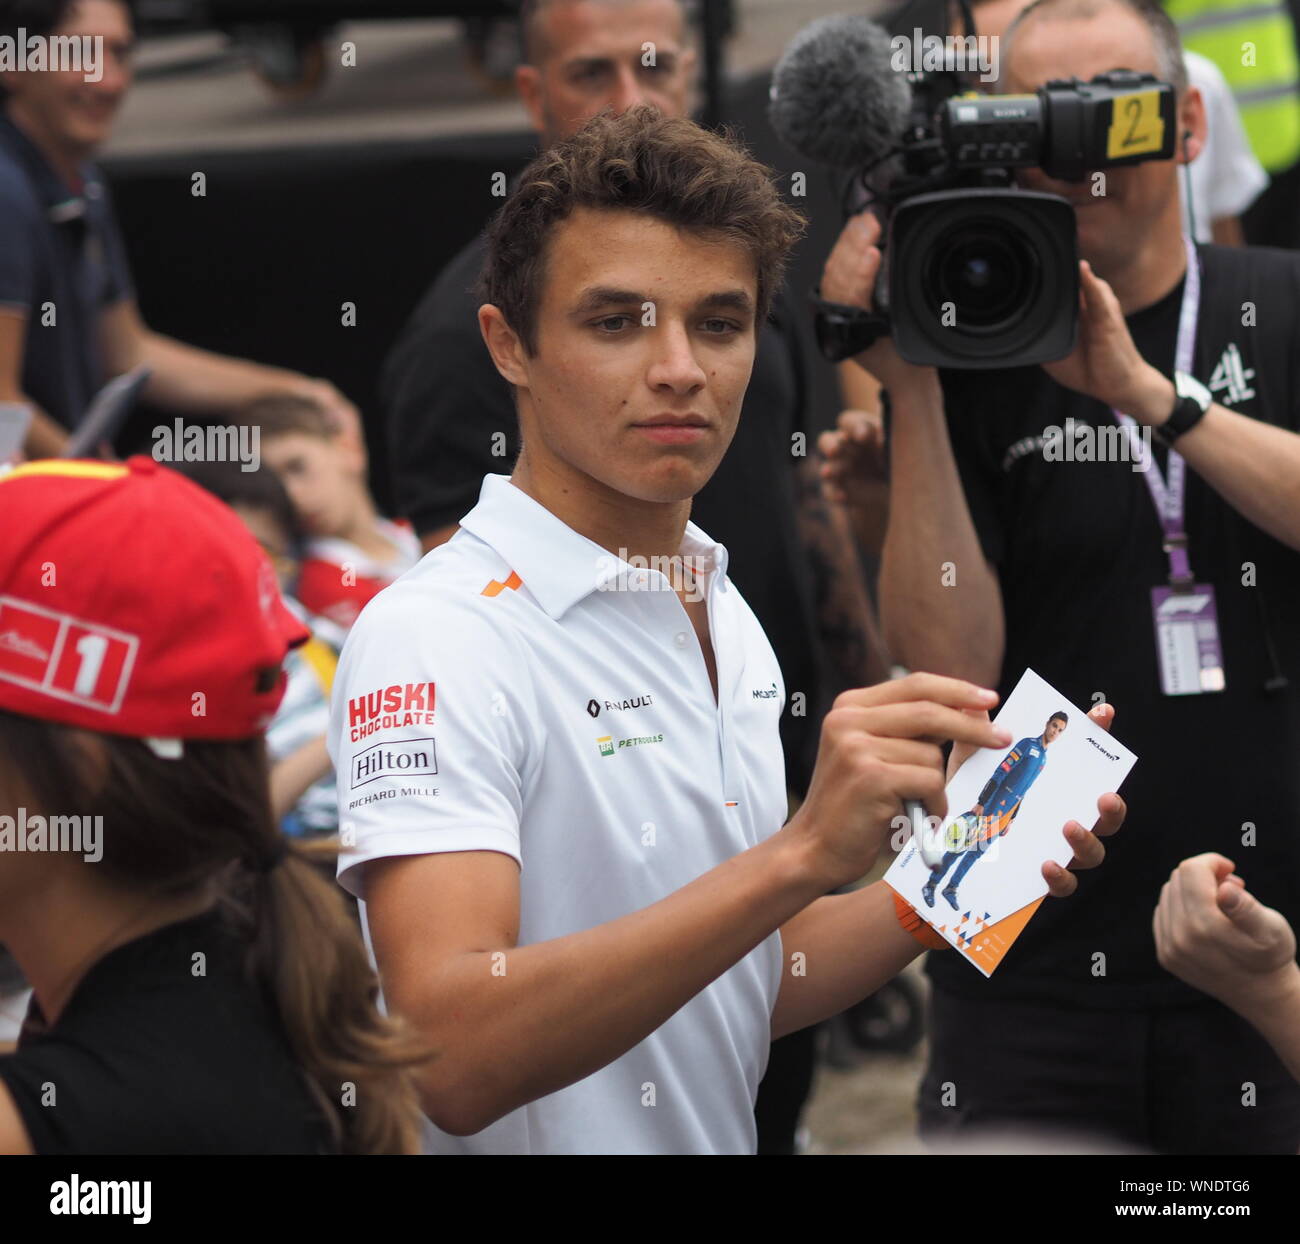 Monza, Italy 5 September 2019: Driver Carlos Sainz and Lando Norris are among fans and giving autograph in Monza circuit paddock. Stock Photo